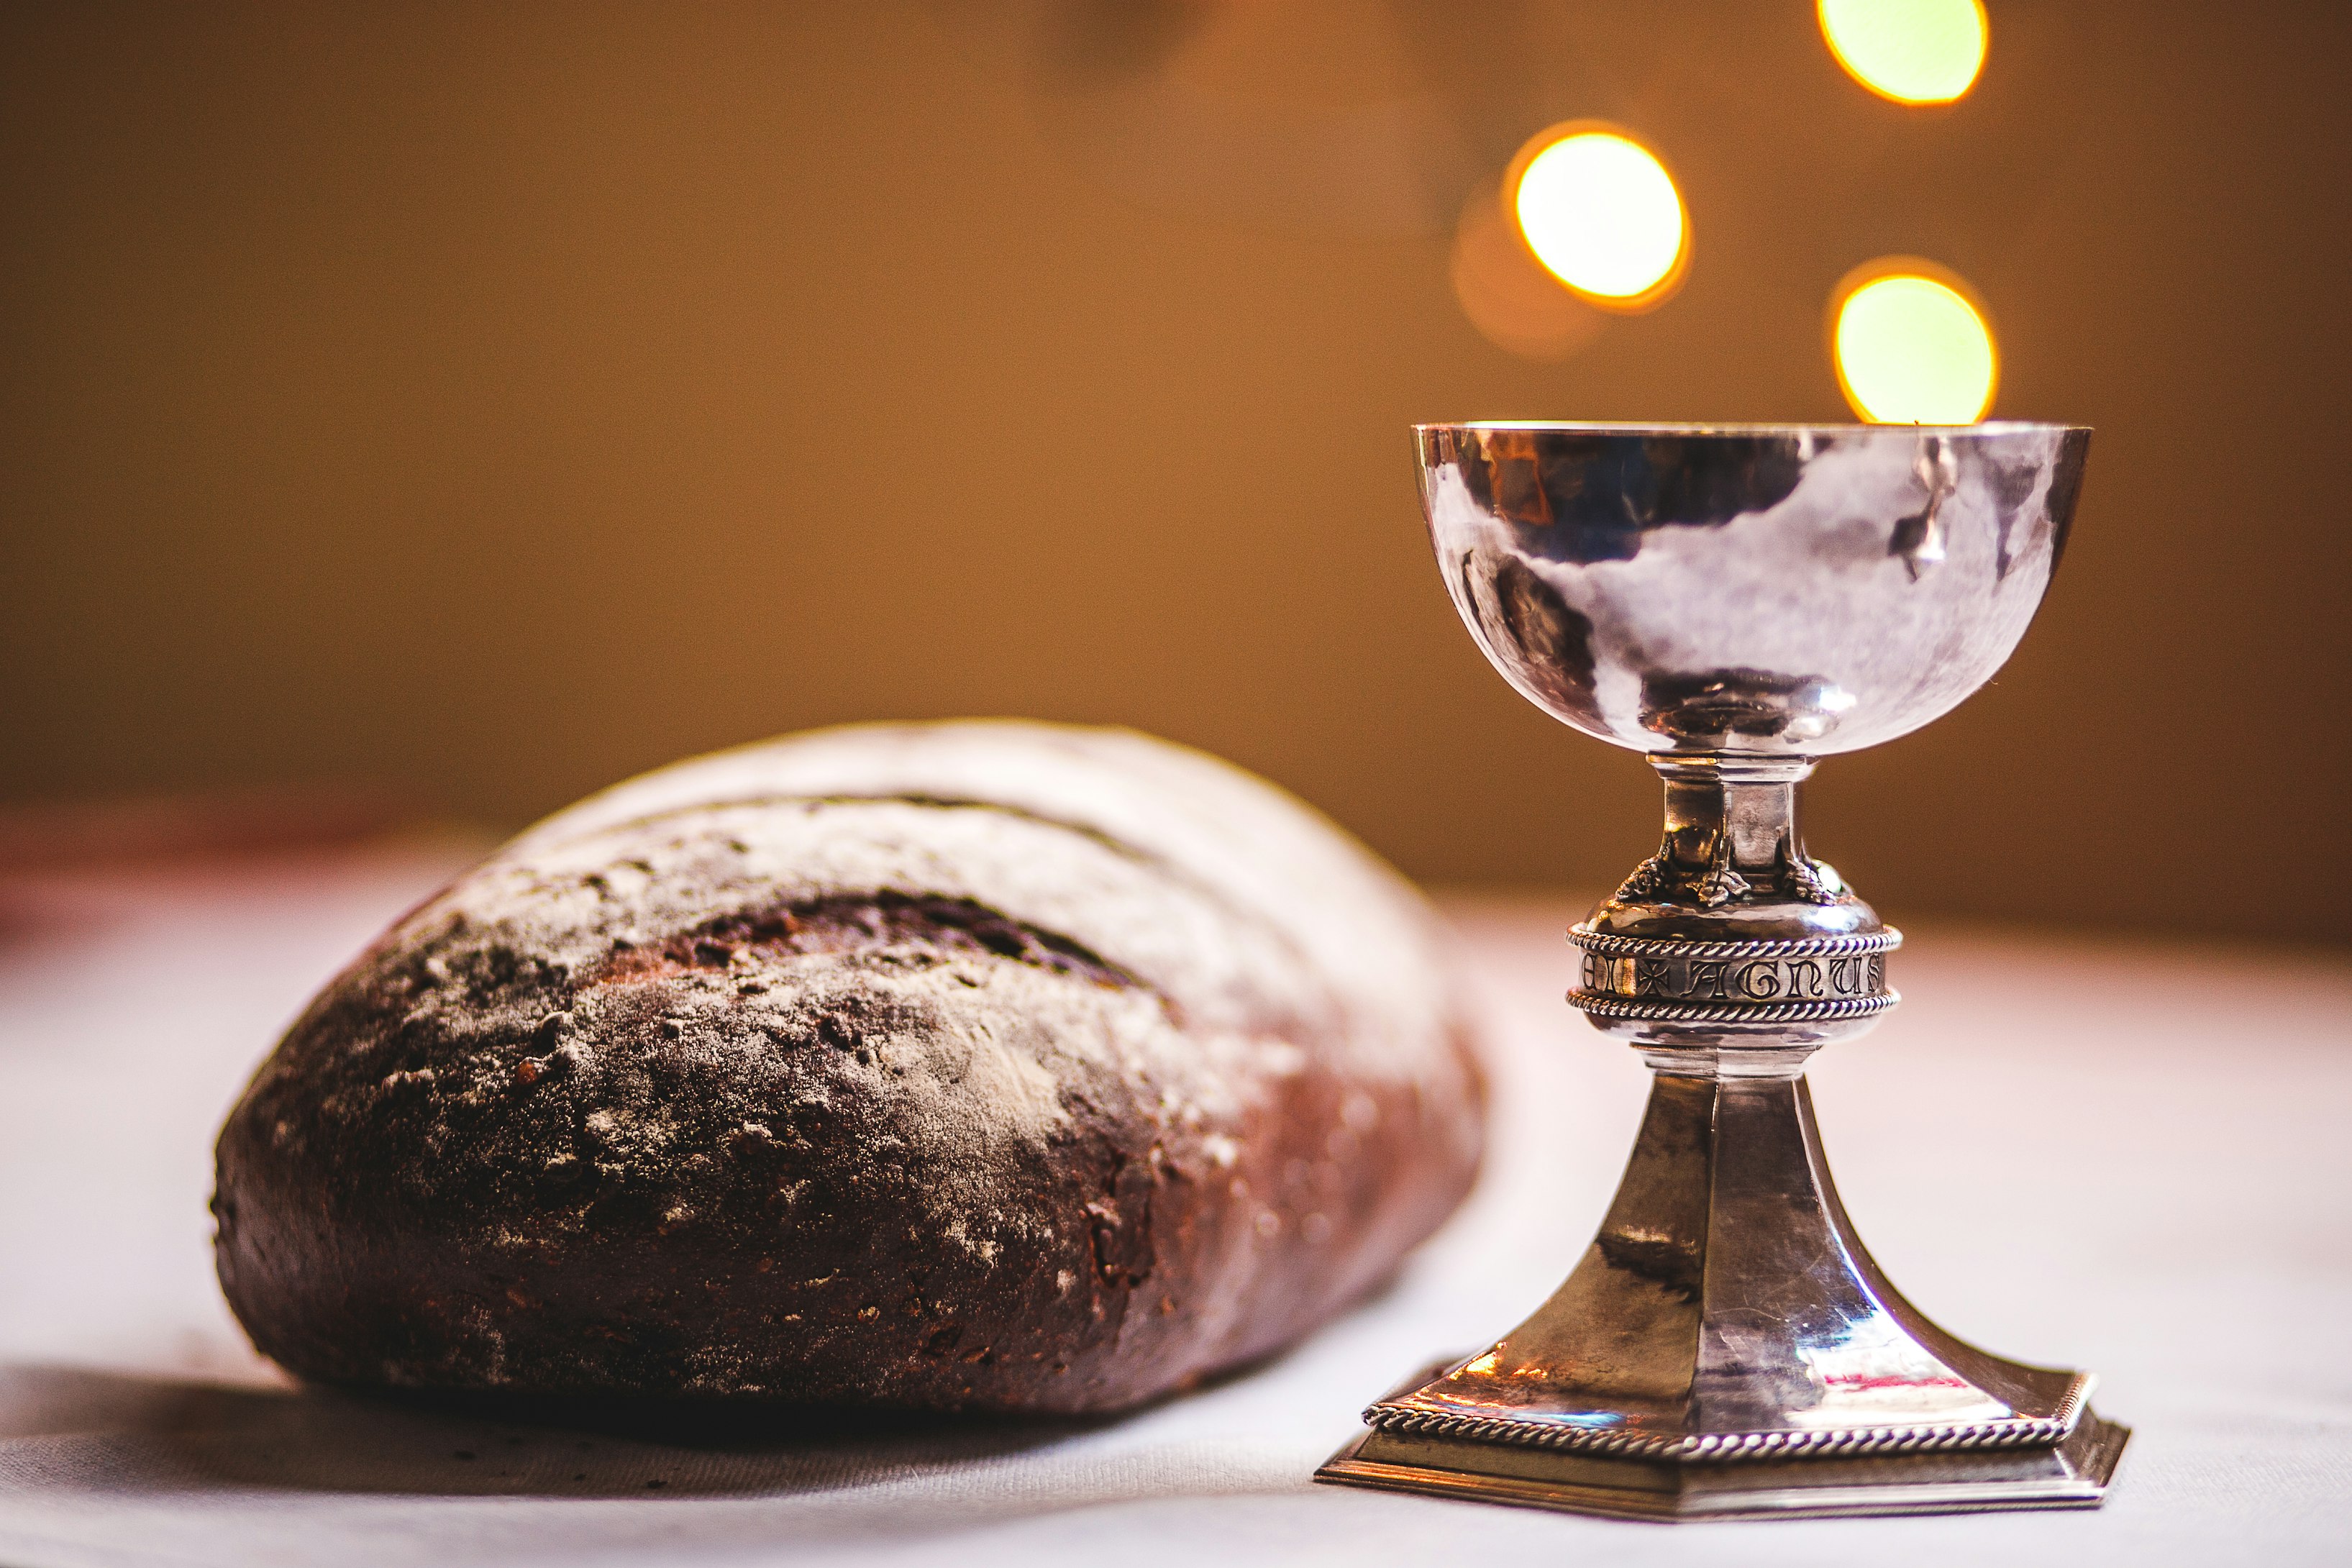 50+ First Communion Captions that Inspire Your Spirit